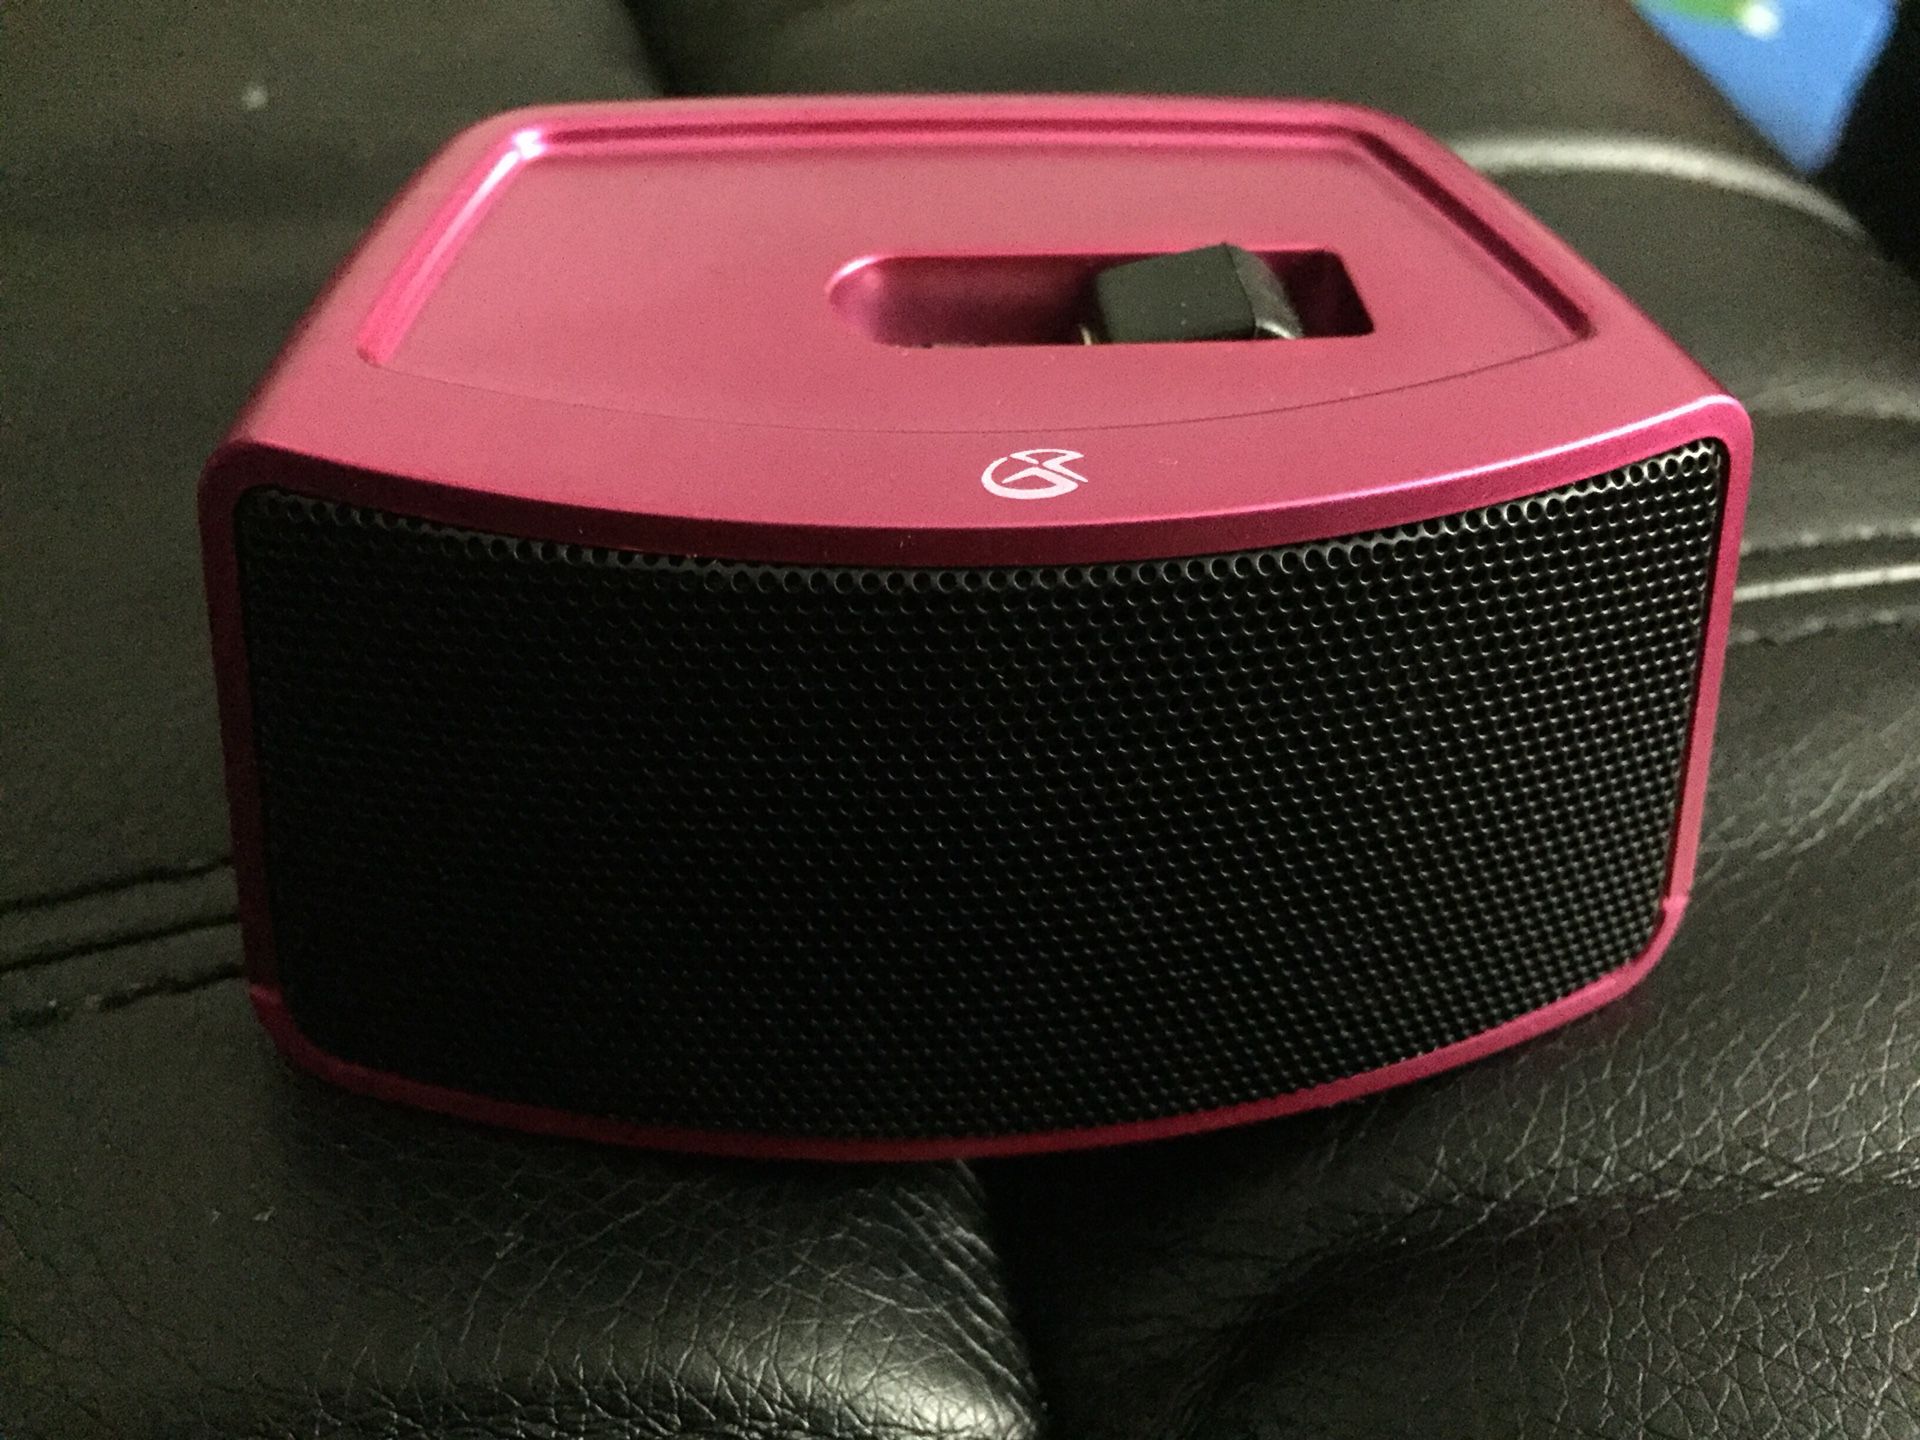 Portable battery operated speaker